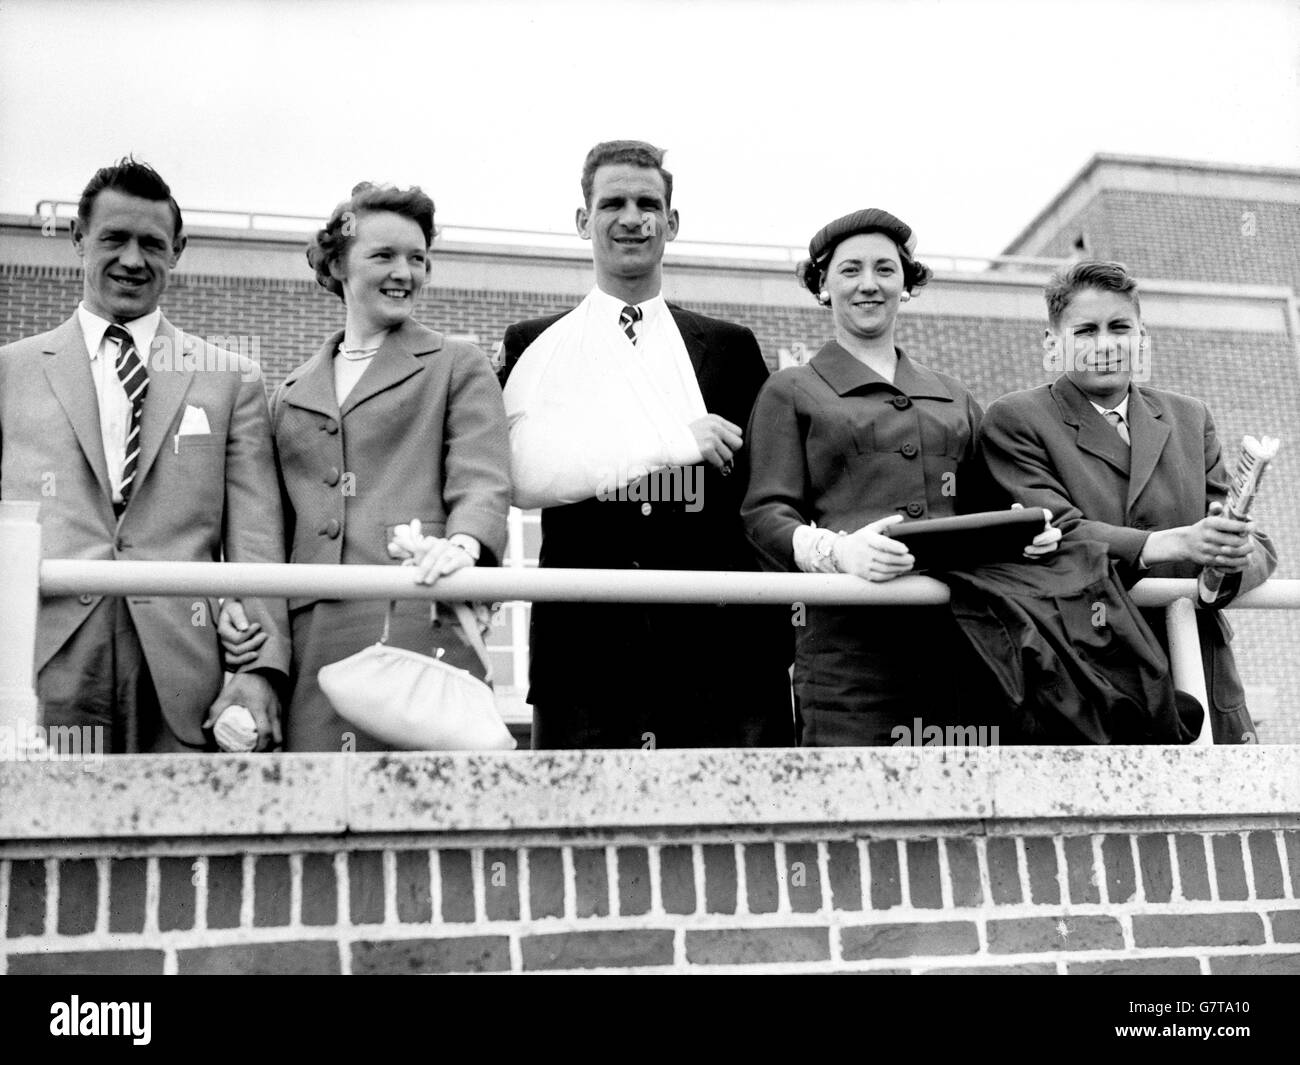 Jack Burkitt, captain of the Cup-wining Nottingham Forest team, has his arm in a sling from a Wembley injury, but that doesn't stop him taking the air with his wife and son, Roger, and team-mate Billy Gray (l) and Mrs Gray (second left) at Hove in Sussex. The Nottingham Forest team spent a day on the Sussex coast before their return home. Stock Photo